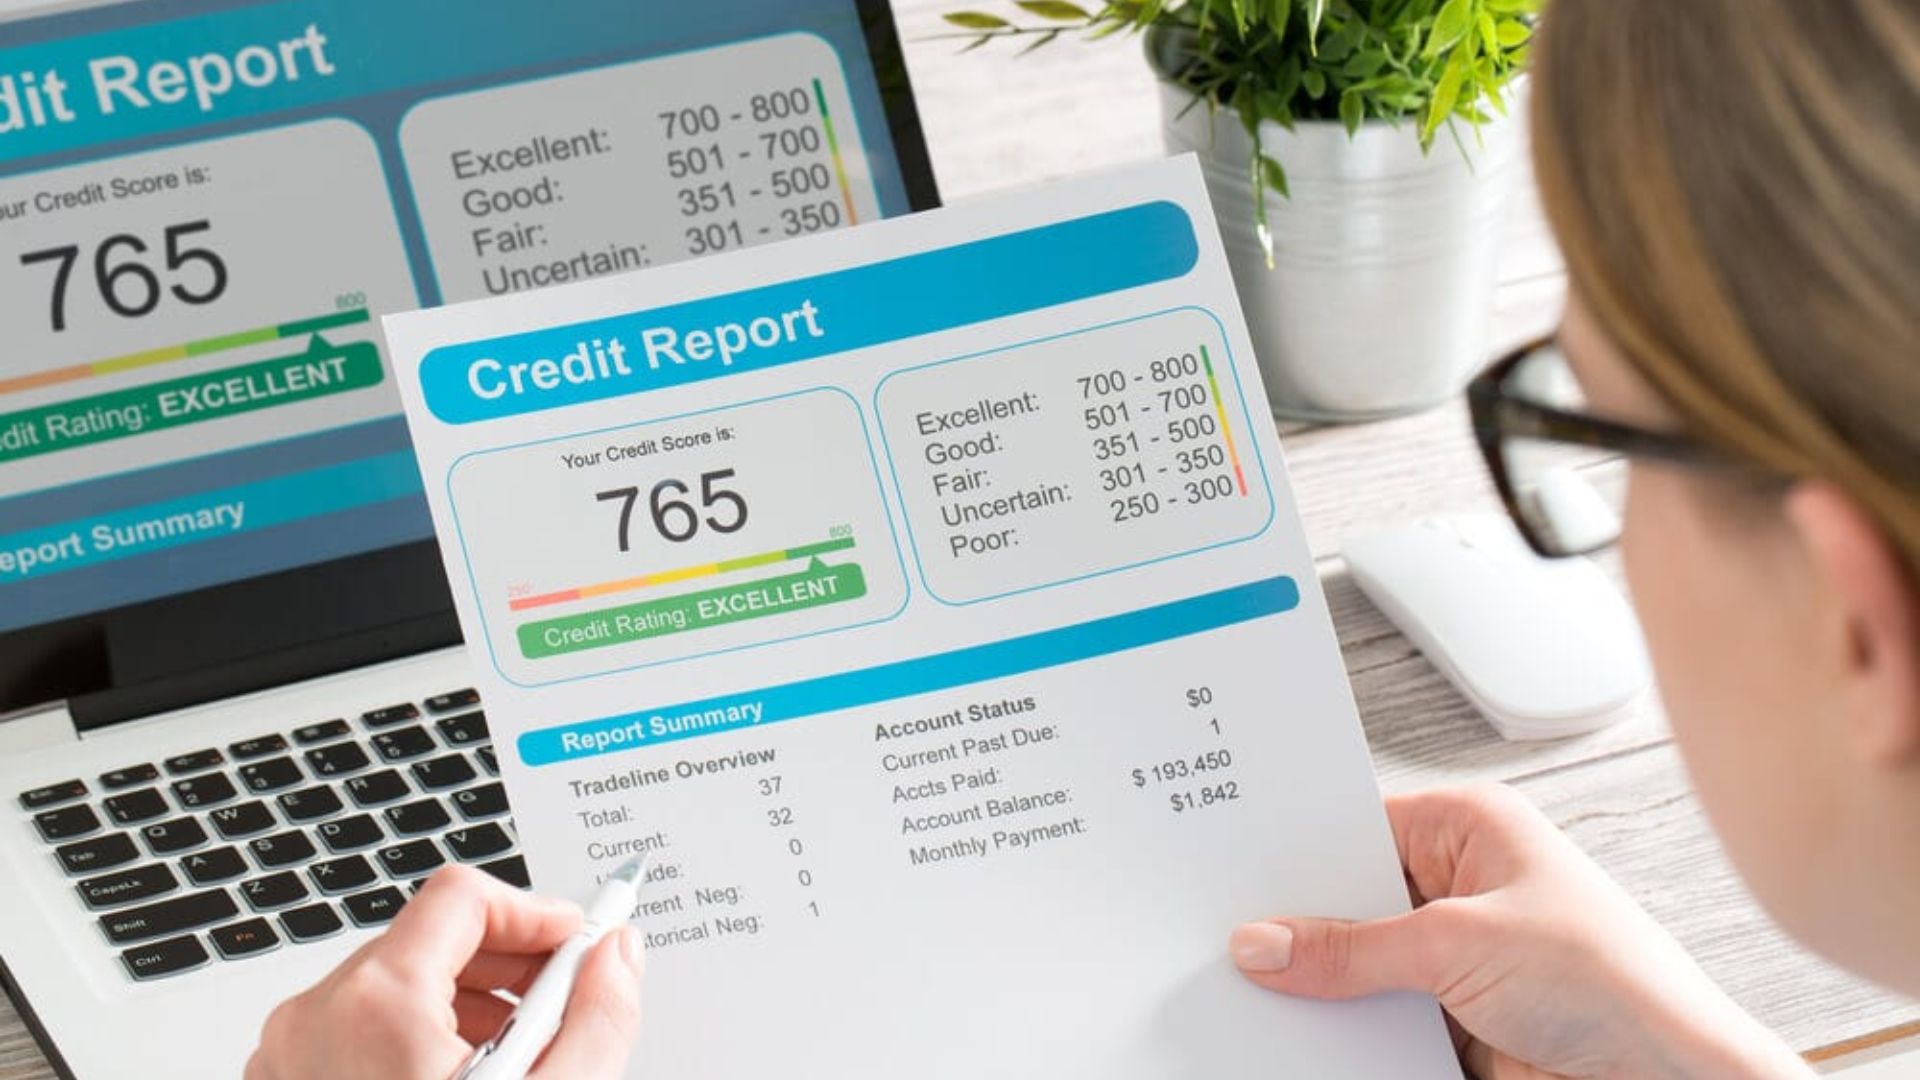 Review and Rectify Your Credit Report.